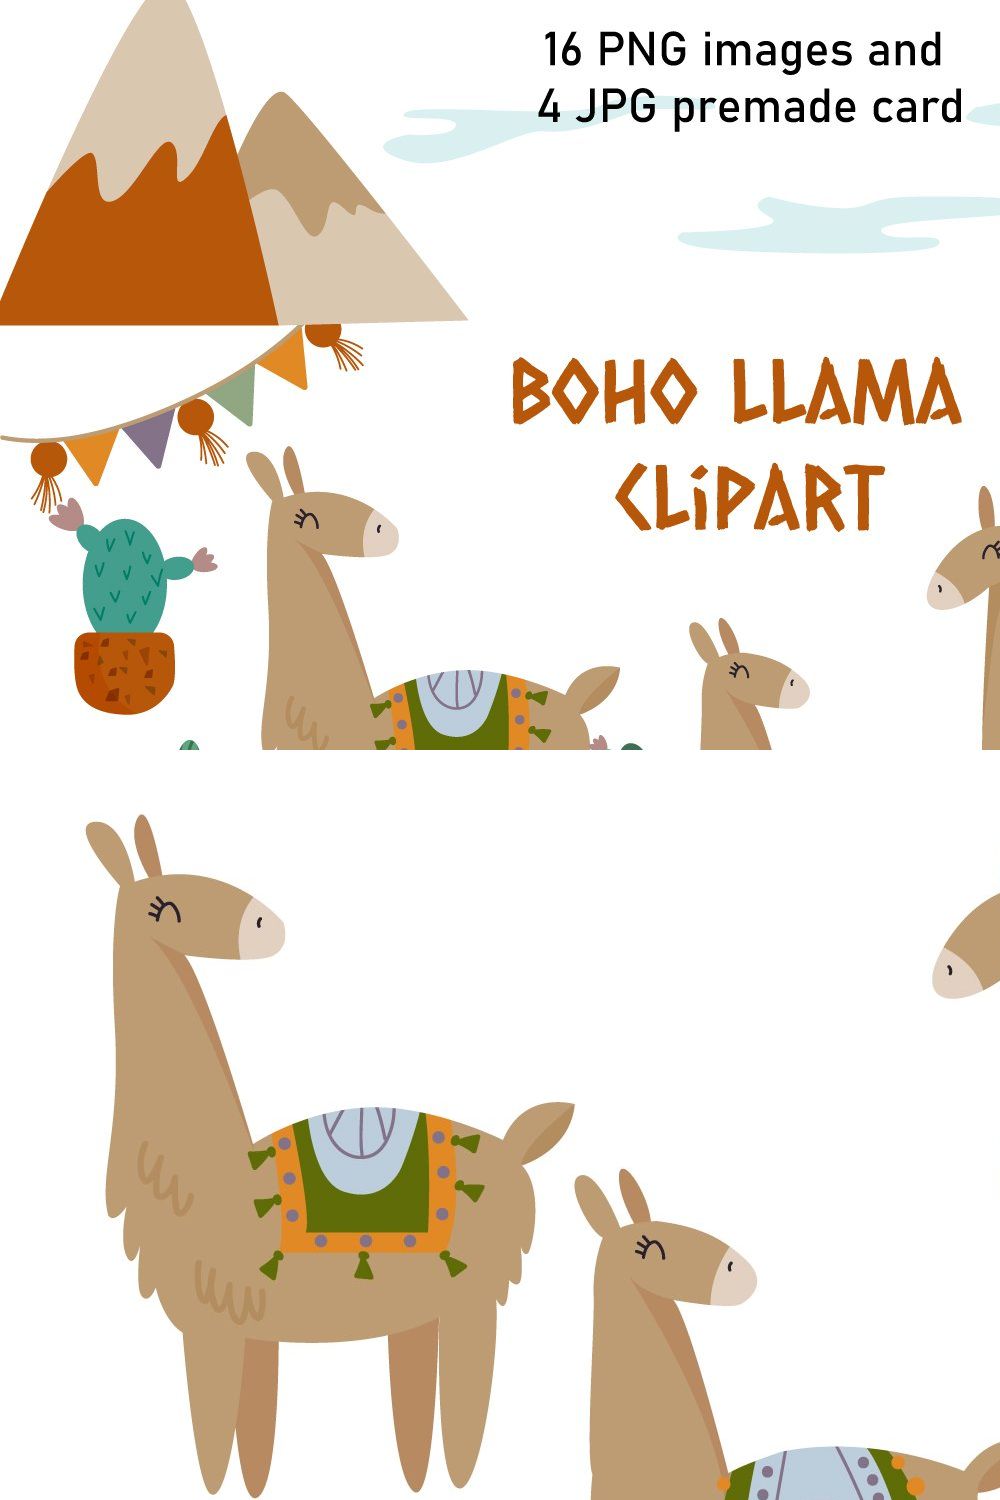 Boho llama clipart and pattern pinterest preview image.